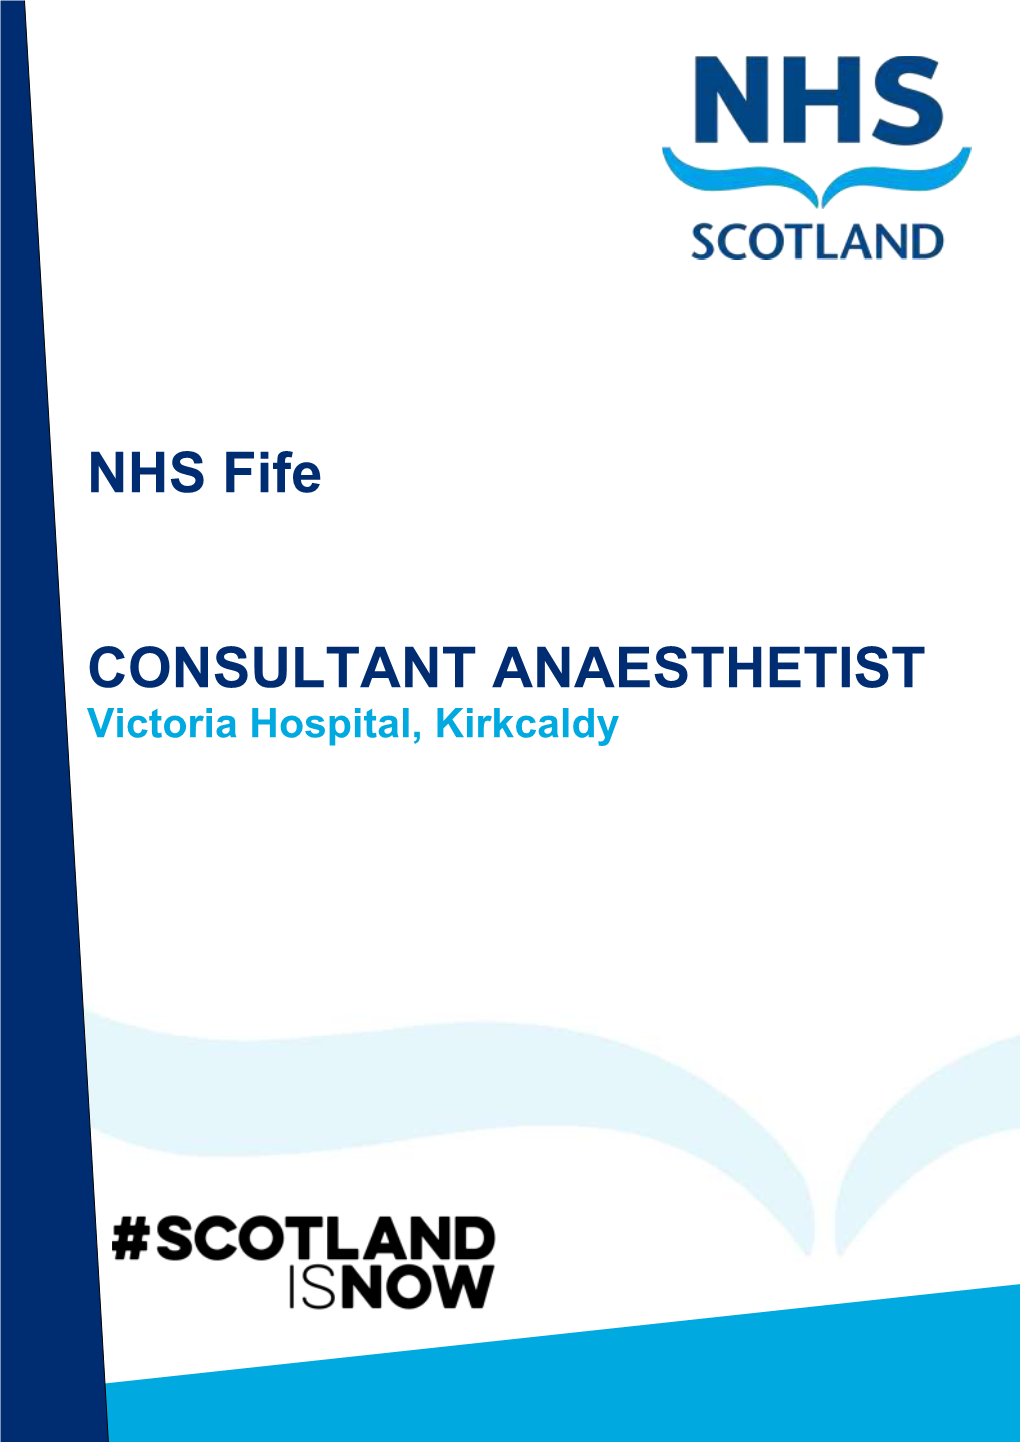 NHS Fife Consultant Anaesthetist